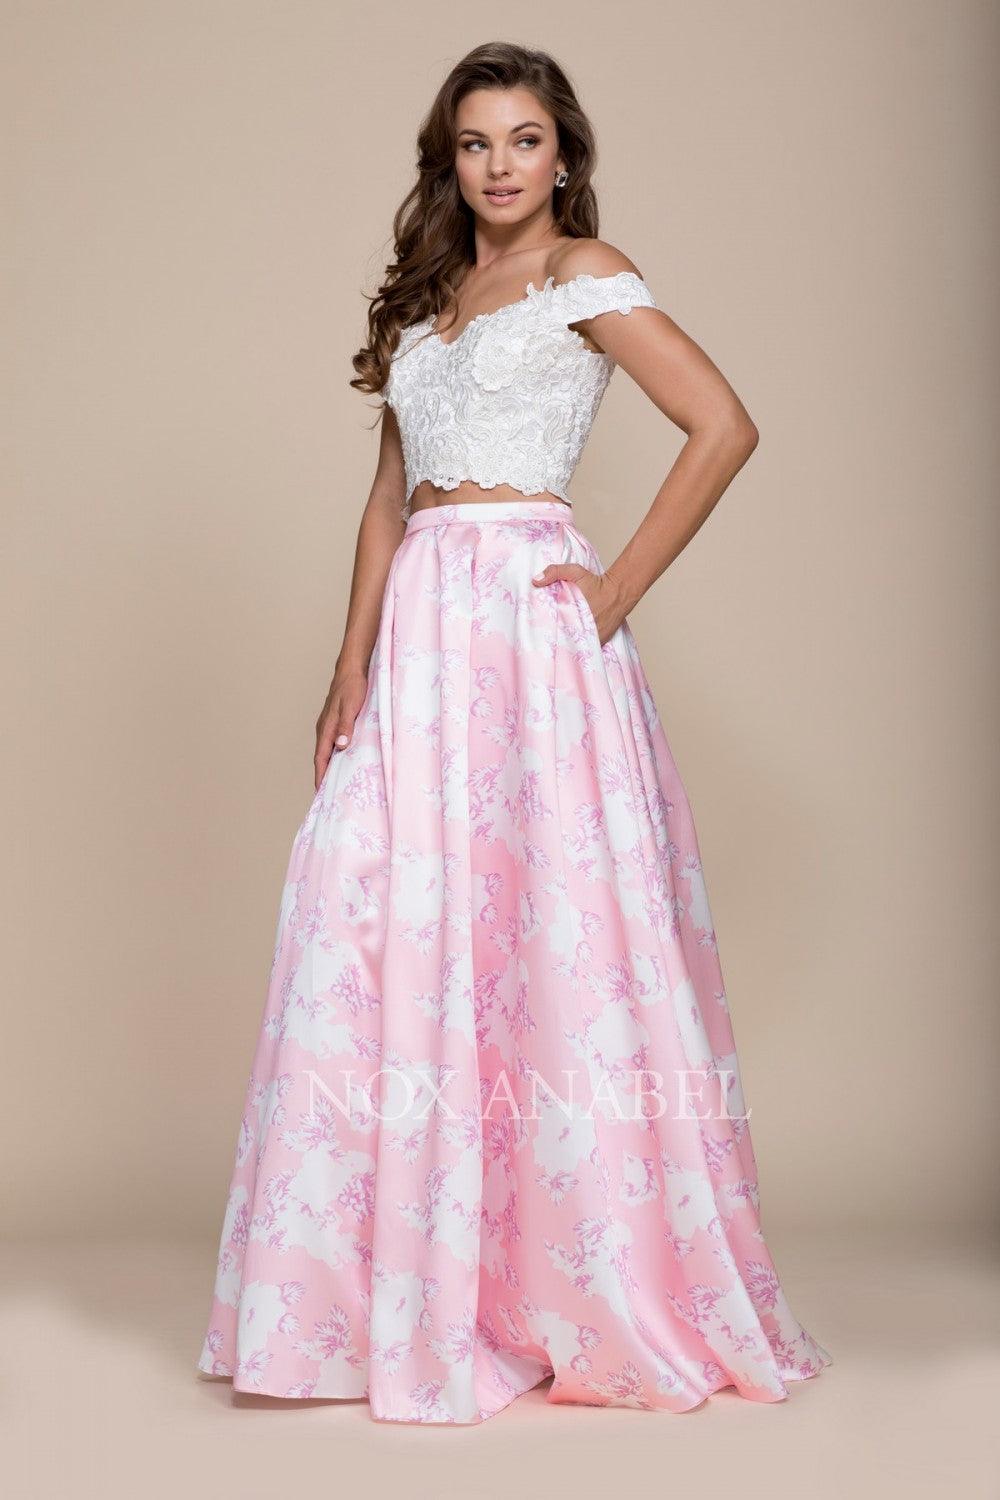 Long Two Piece Floral Print Prom Dress - The Dress Outlet Nox Anabel